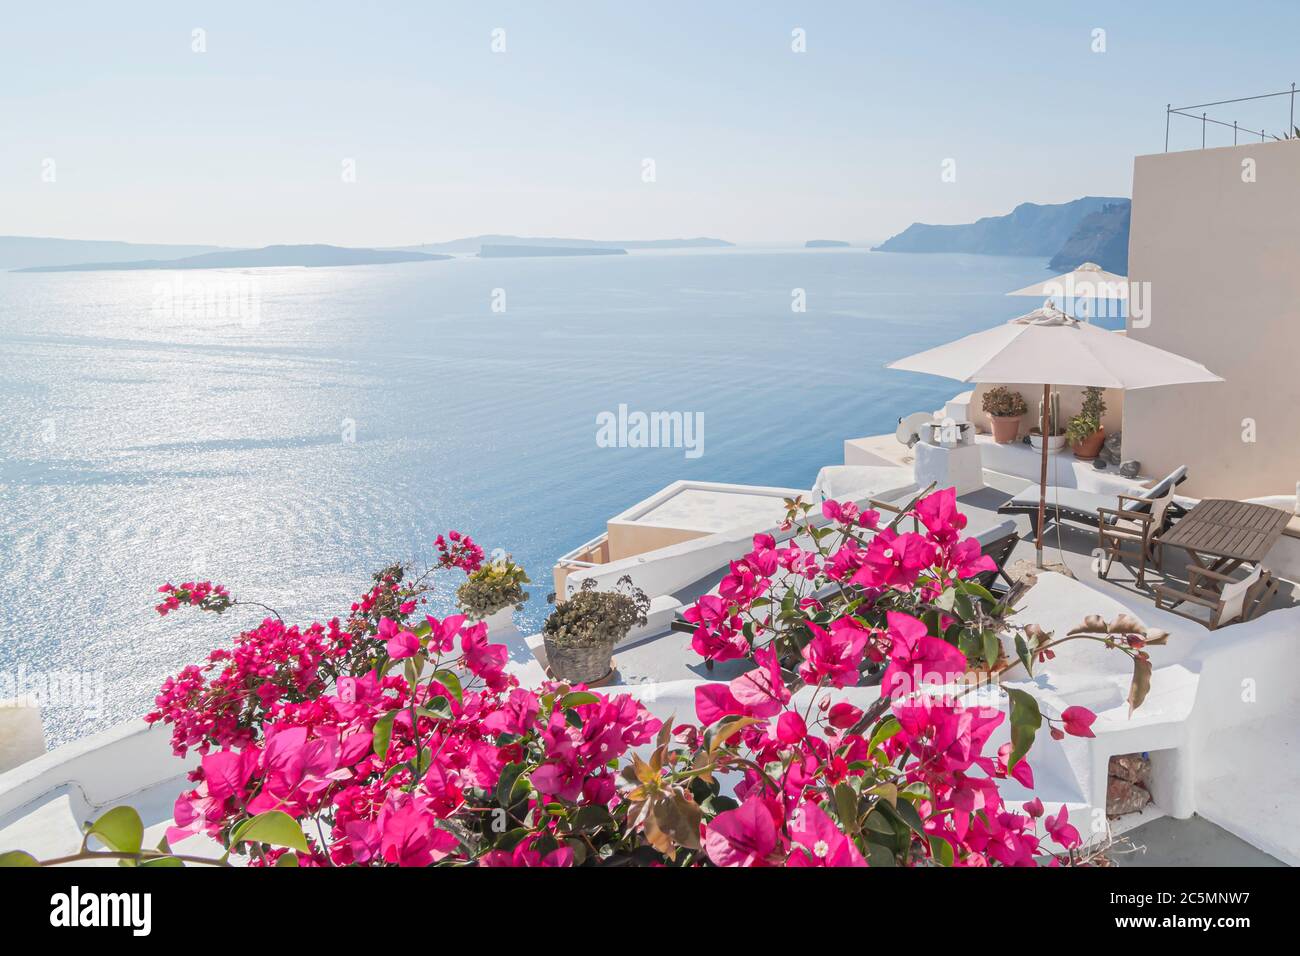 Santorini, Greece white and blue. View of the caldera from the village of Oia. Stock Photo